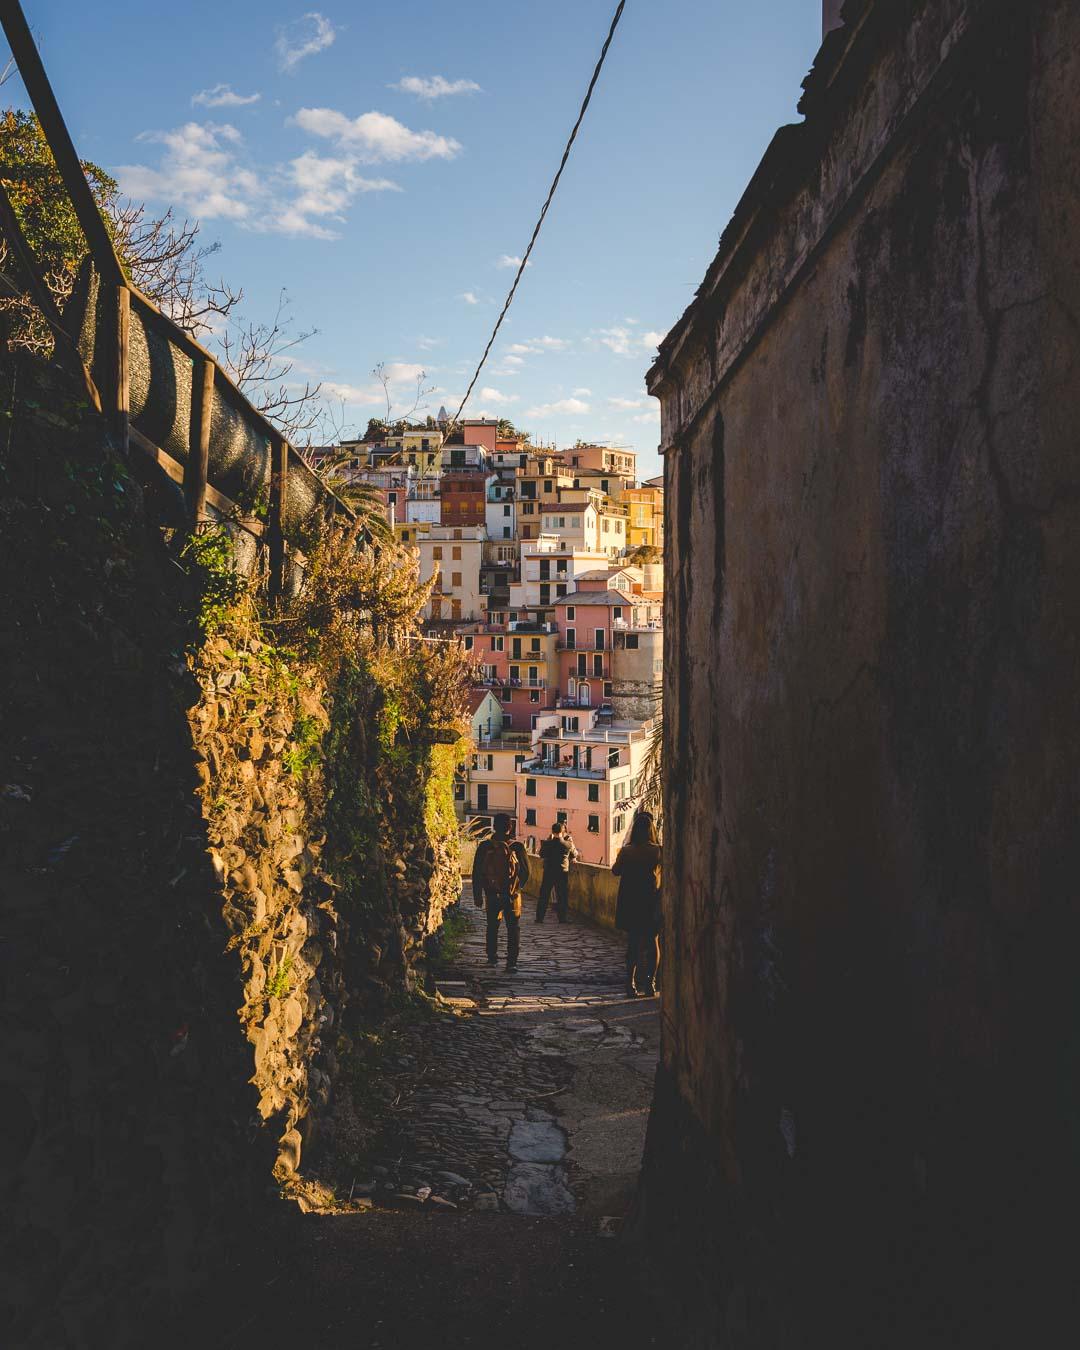 going down to the main viewpoint over manarola